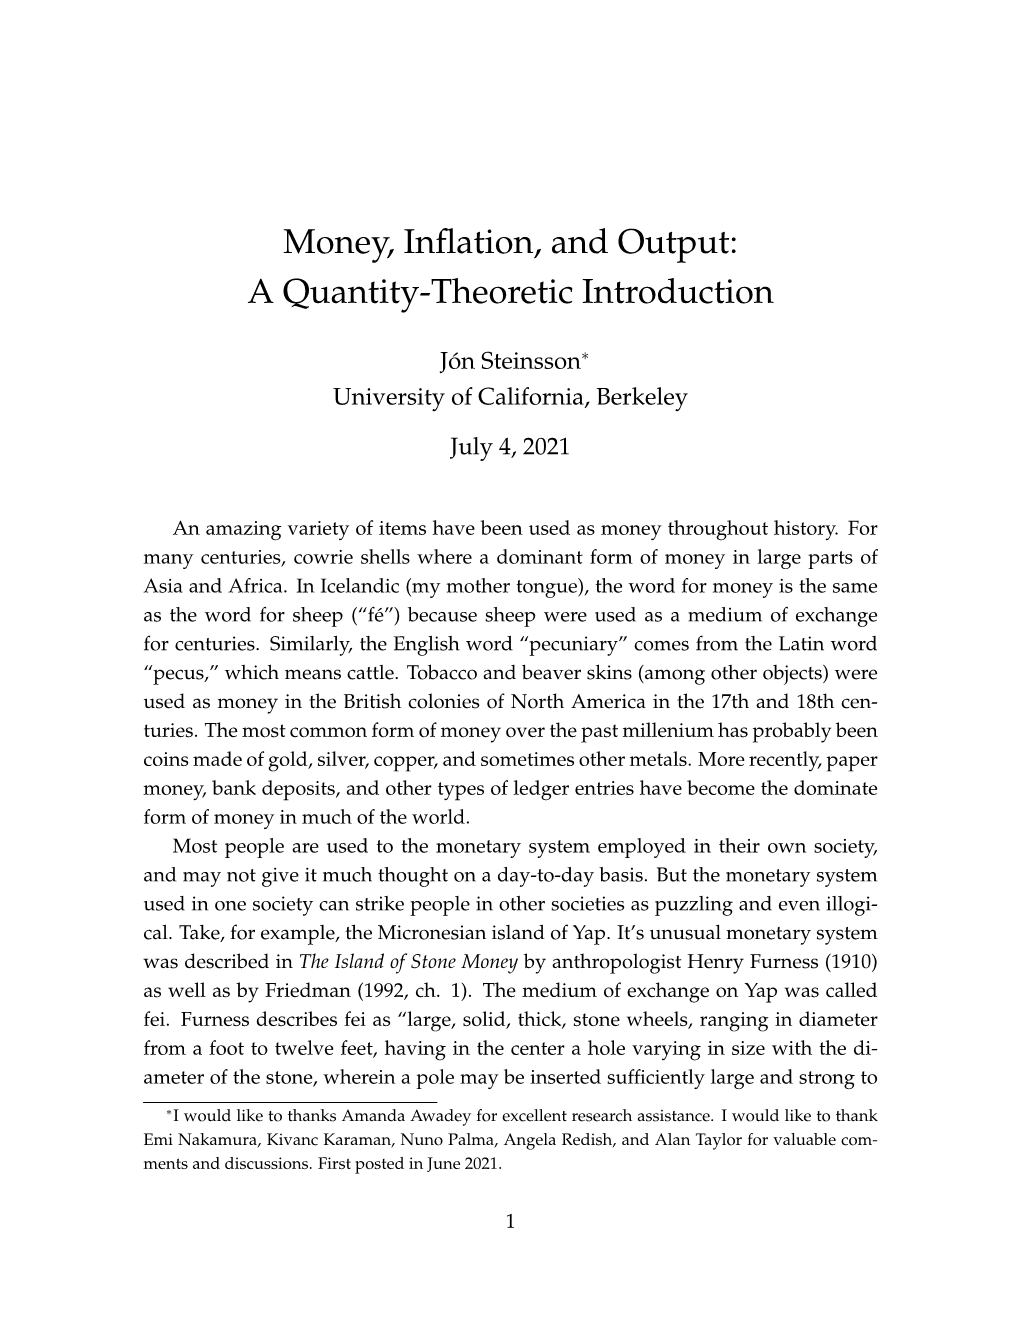 Money, Inflation, and Output: a Quantity-Theoretic Introduction